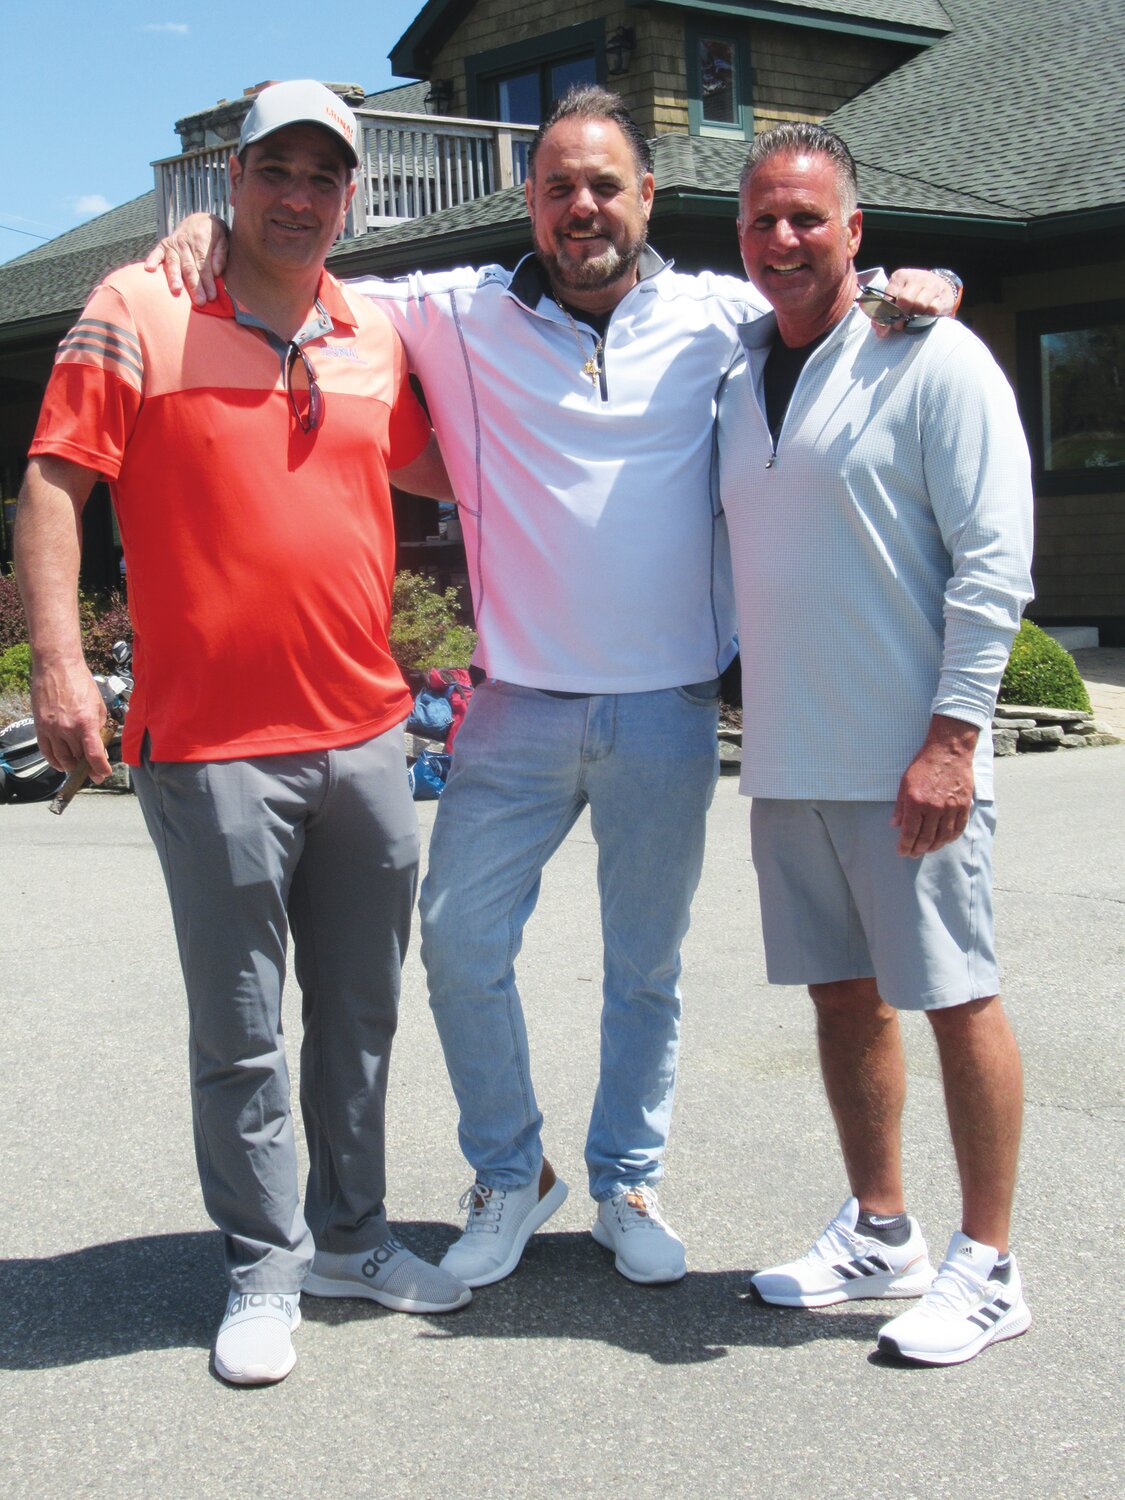 SUPER SPECIAL SUPPORTERS: Joe Caprarco (left), Michael Sabitono and Ray Johnston of the famed Laborers Union international were three huge reasons behind the success of the JMCE Golf tournament.